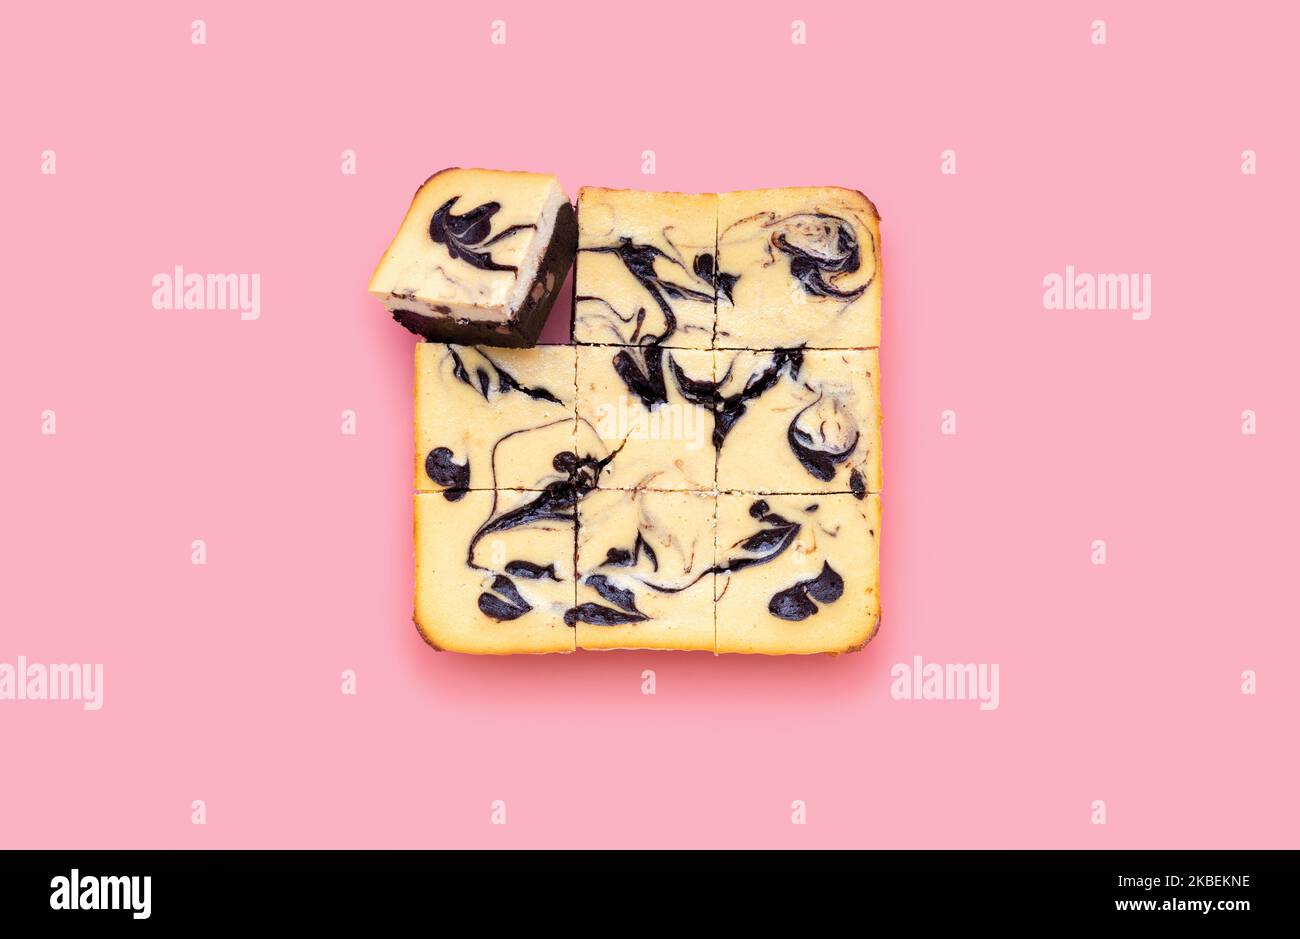 Homemade brownie cheesecake minimalist on a pink-colored background. Top view with a delicious layered cake with a chocolate layer and cream cheese. Stock Photo